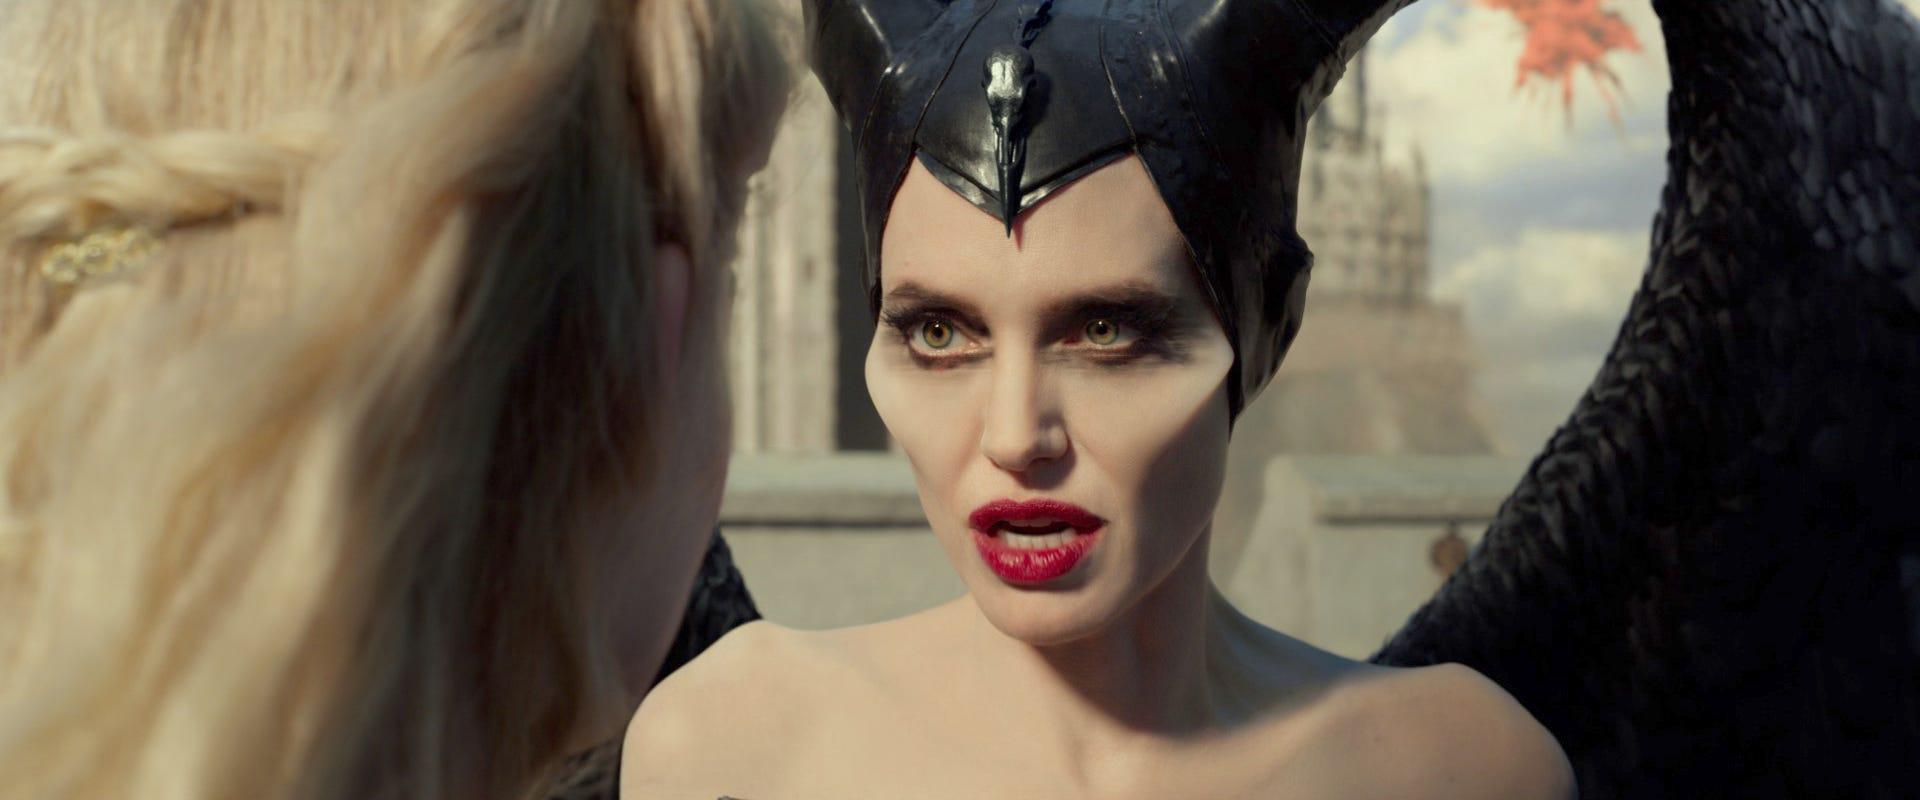 Maleficent 2': Angelina Jolie sequel (barely) takes down 'Joker'